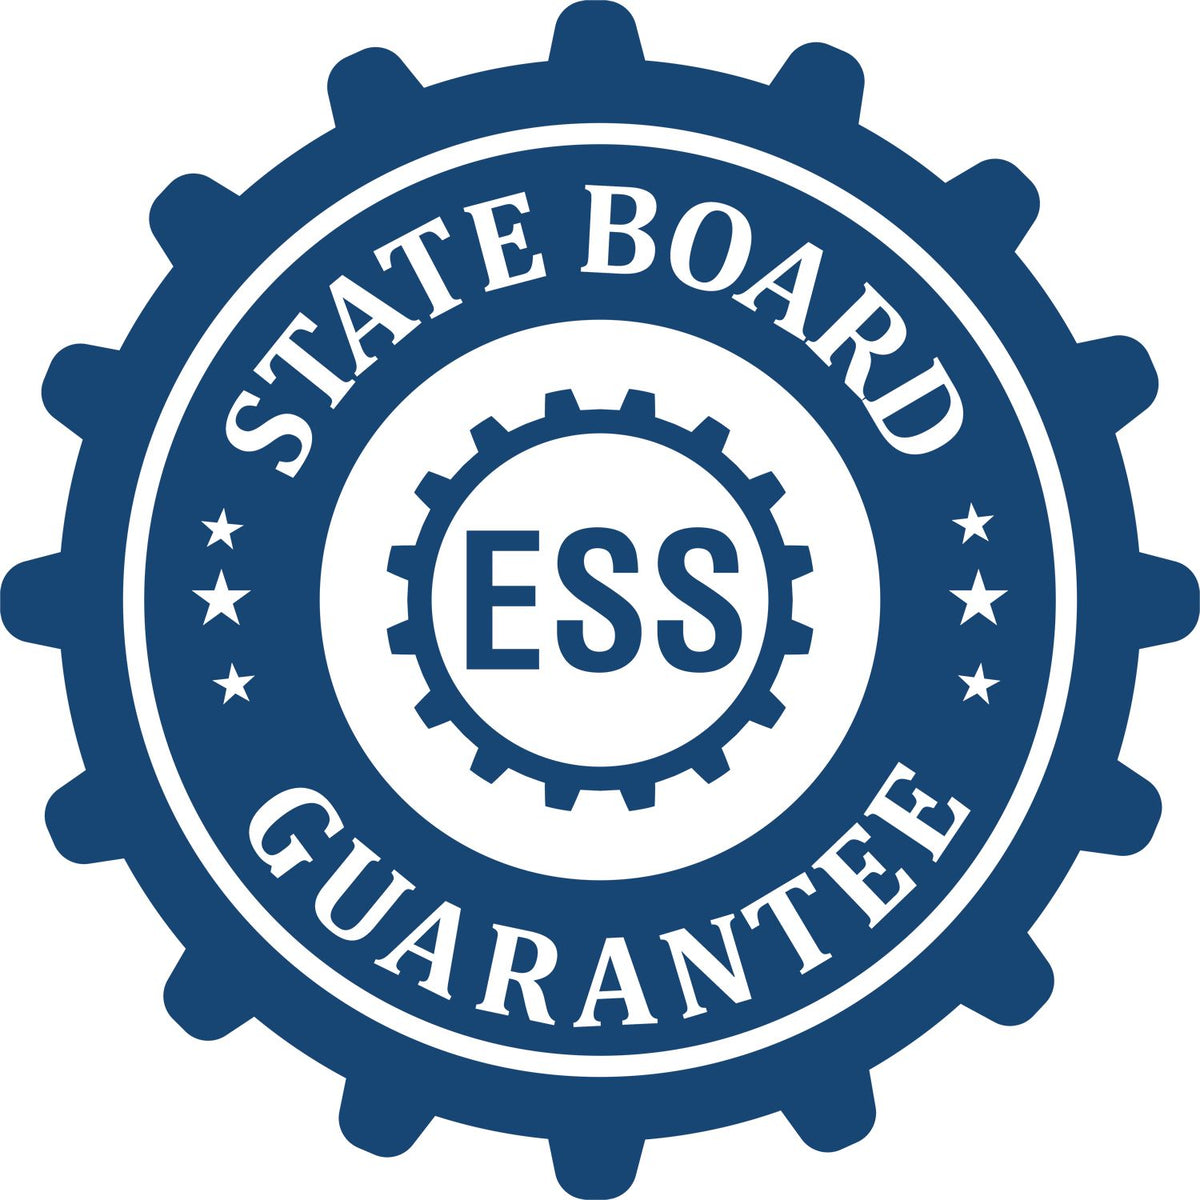 An emblem in a gear shape illustrating a state board guarantee for the Hybrid New Jersey Engineer Seal